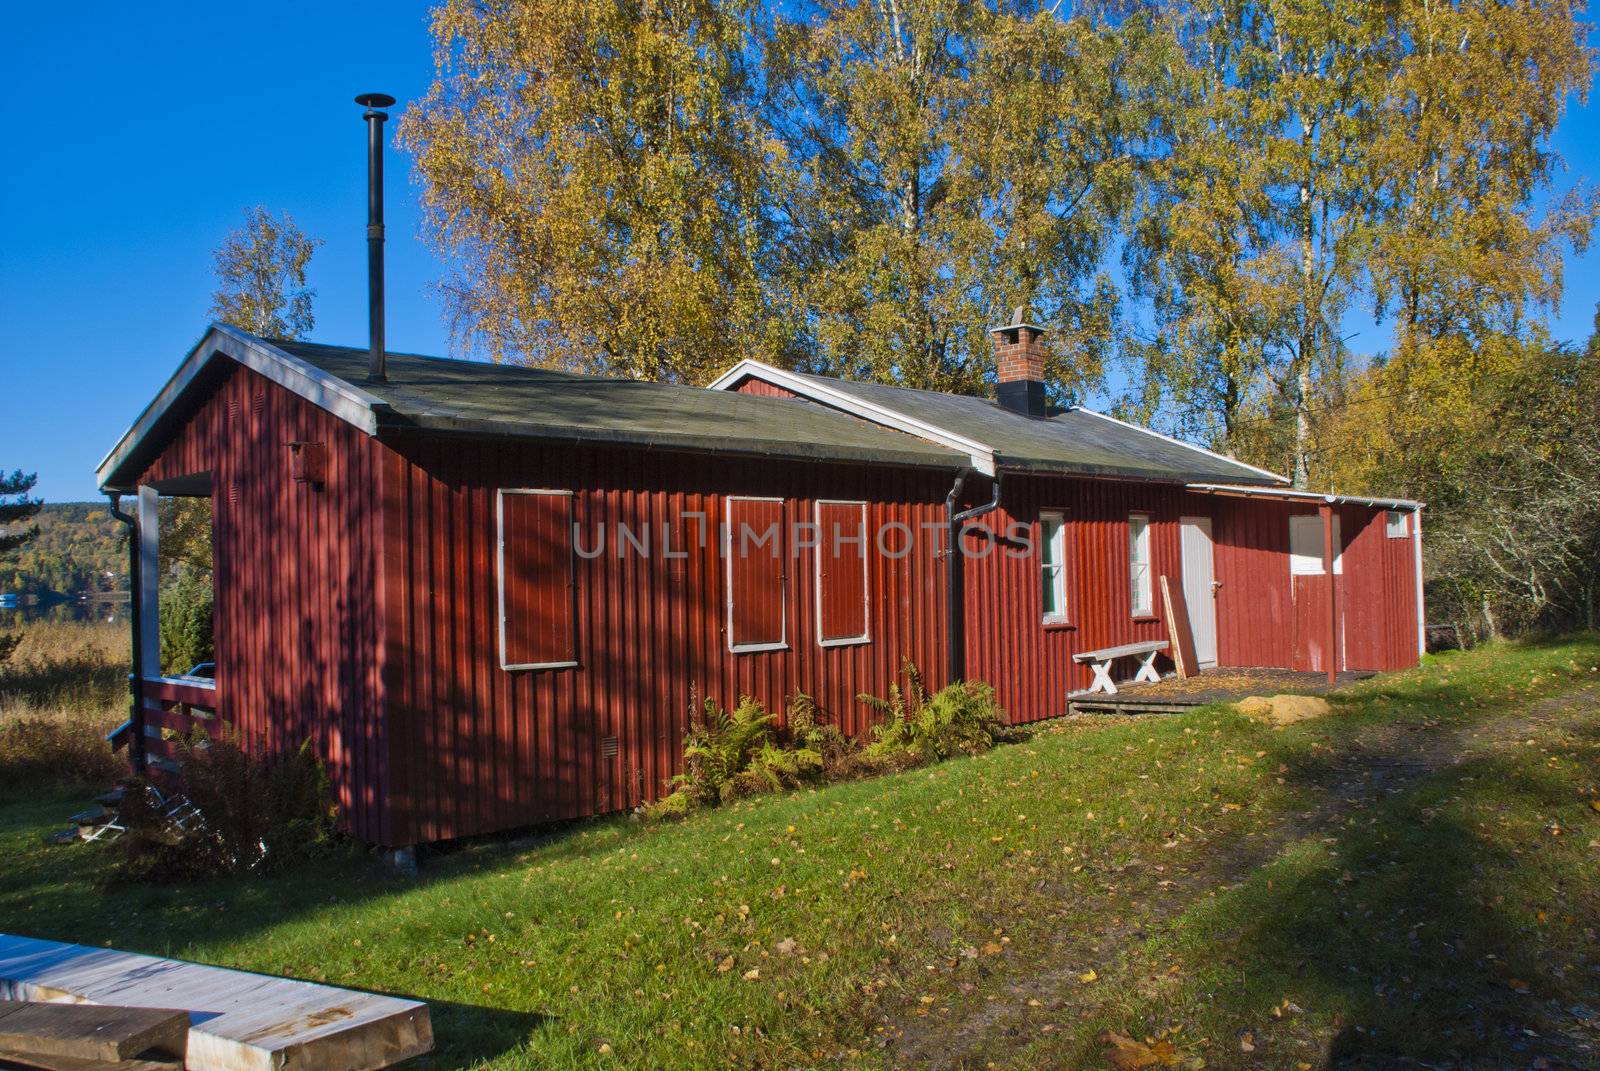 a cozy little red cabin situated close to the  iddefjord at bakke in halden municipality, the cabin has its own small beach 20 meters from the cabin wall, picture is shot in october 2012